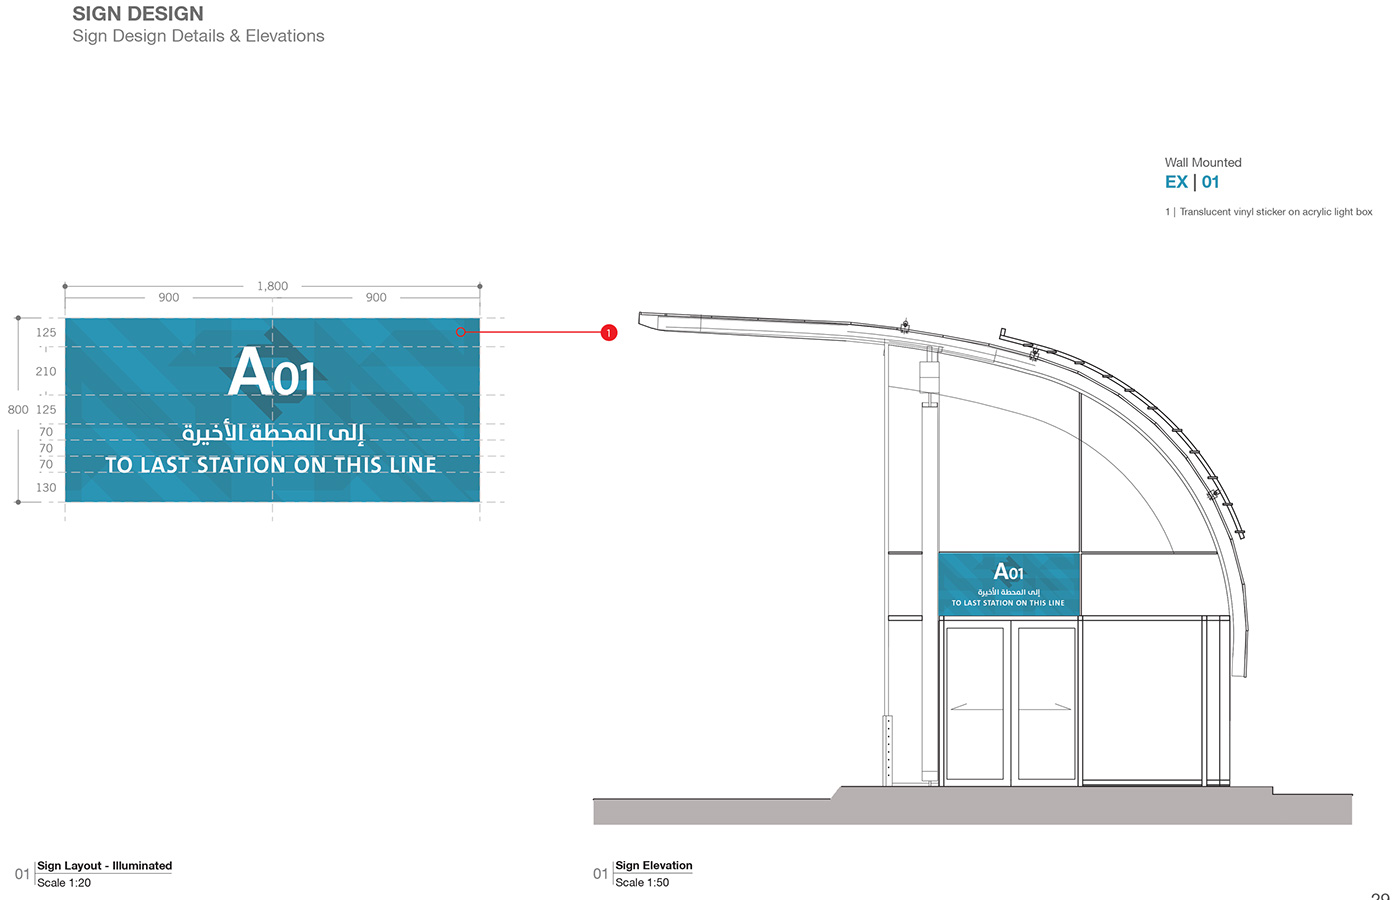 Environmental Graphic Design Signage wayfinding branding  Experiential bus STATION architecture Elevations